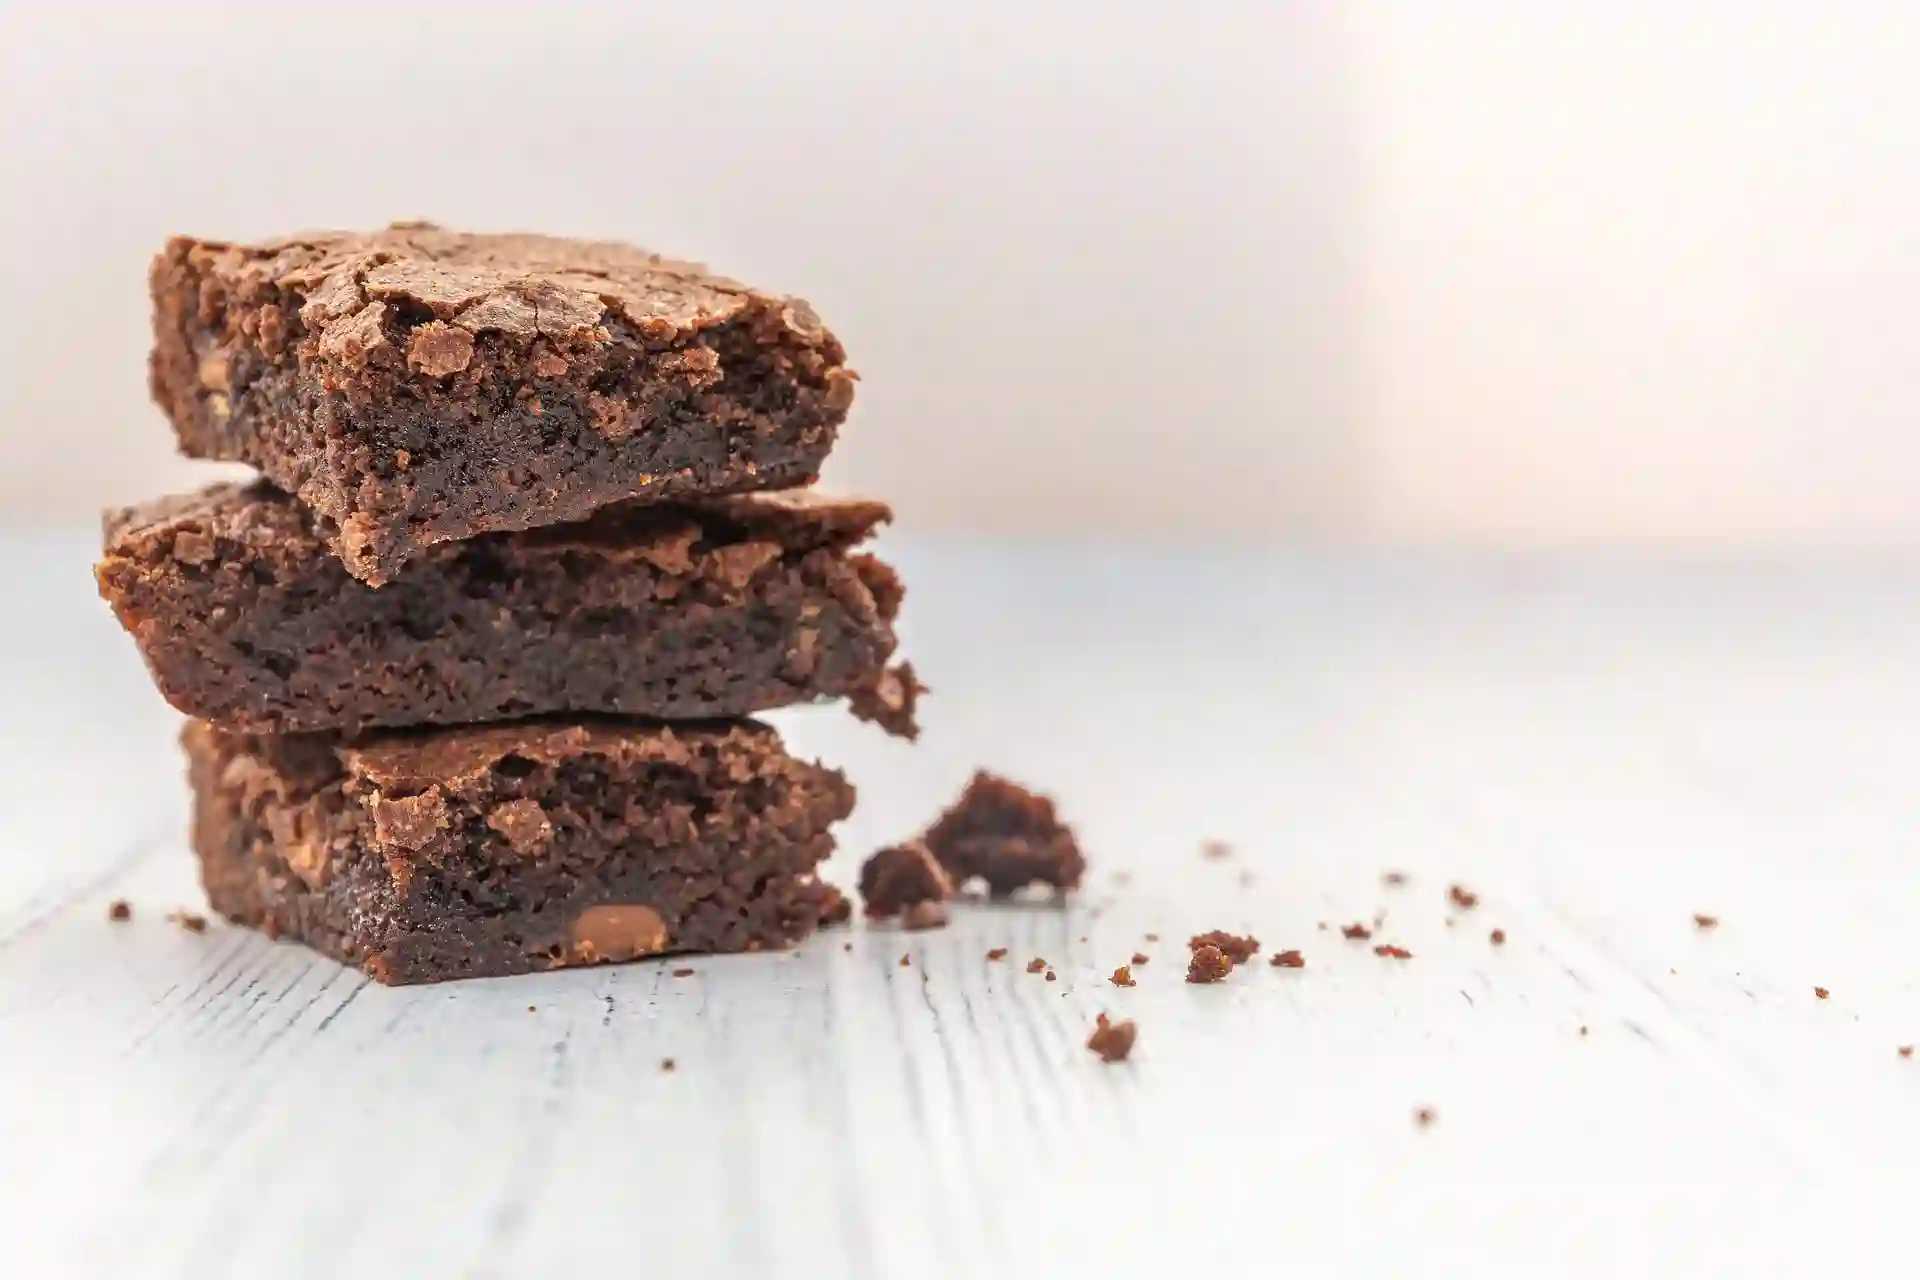 Inyo Whats in this Brownie The Science Behind Edible Potency